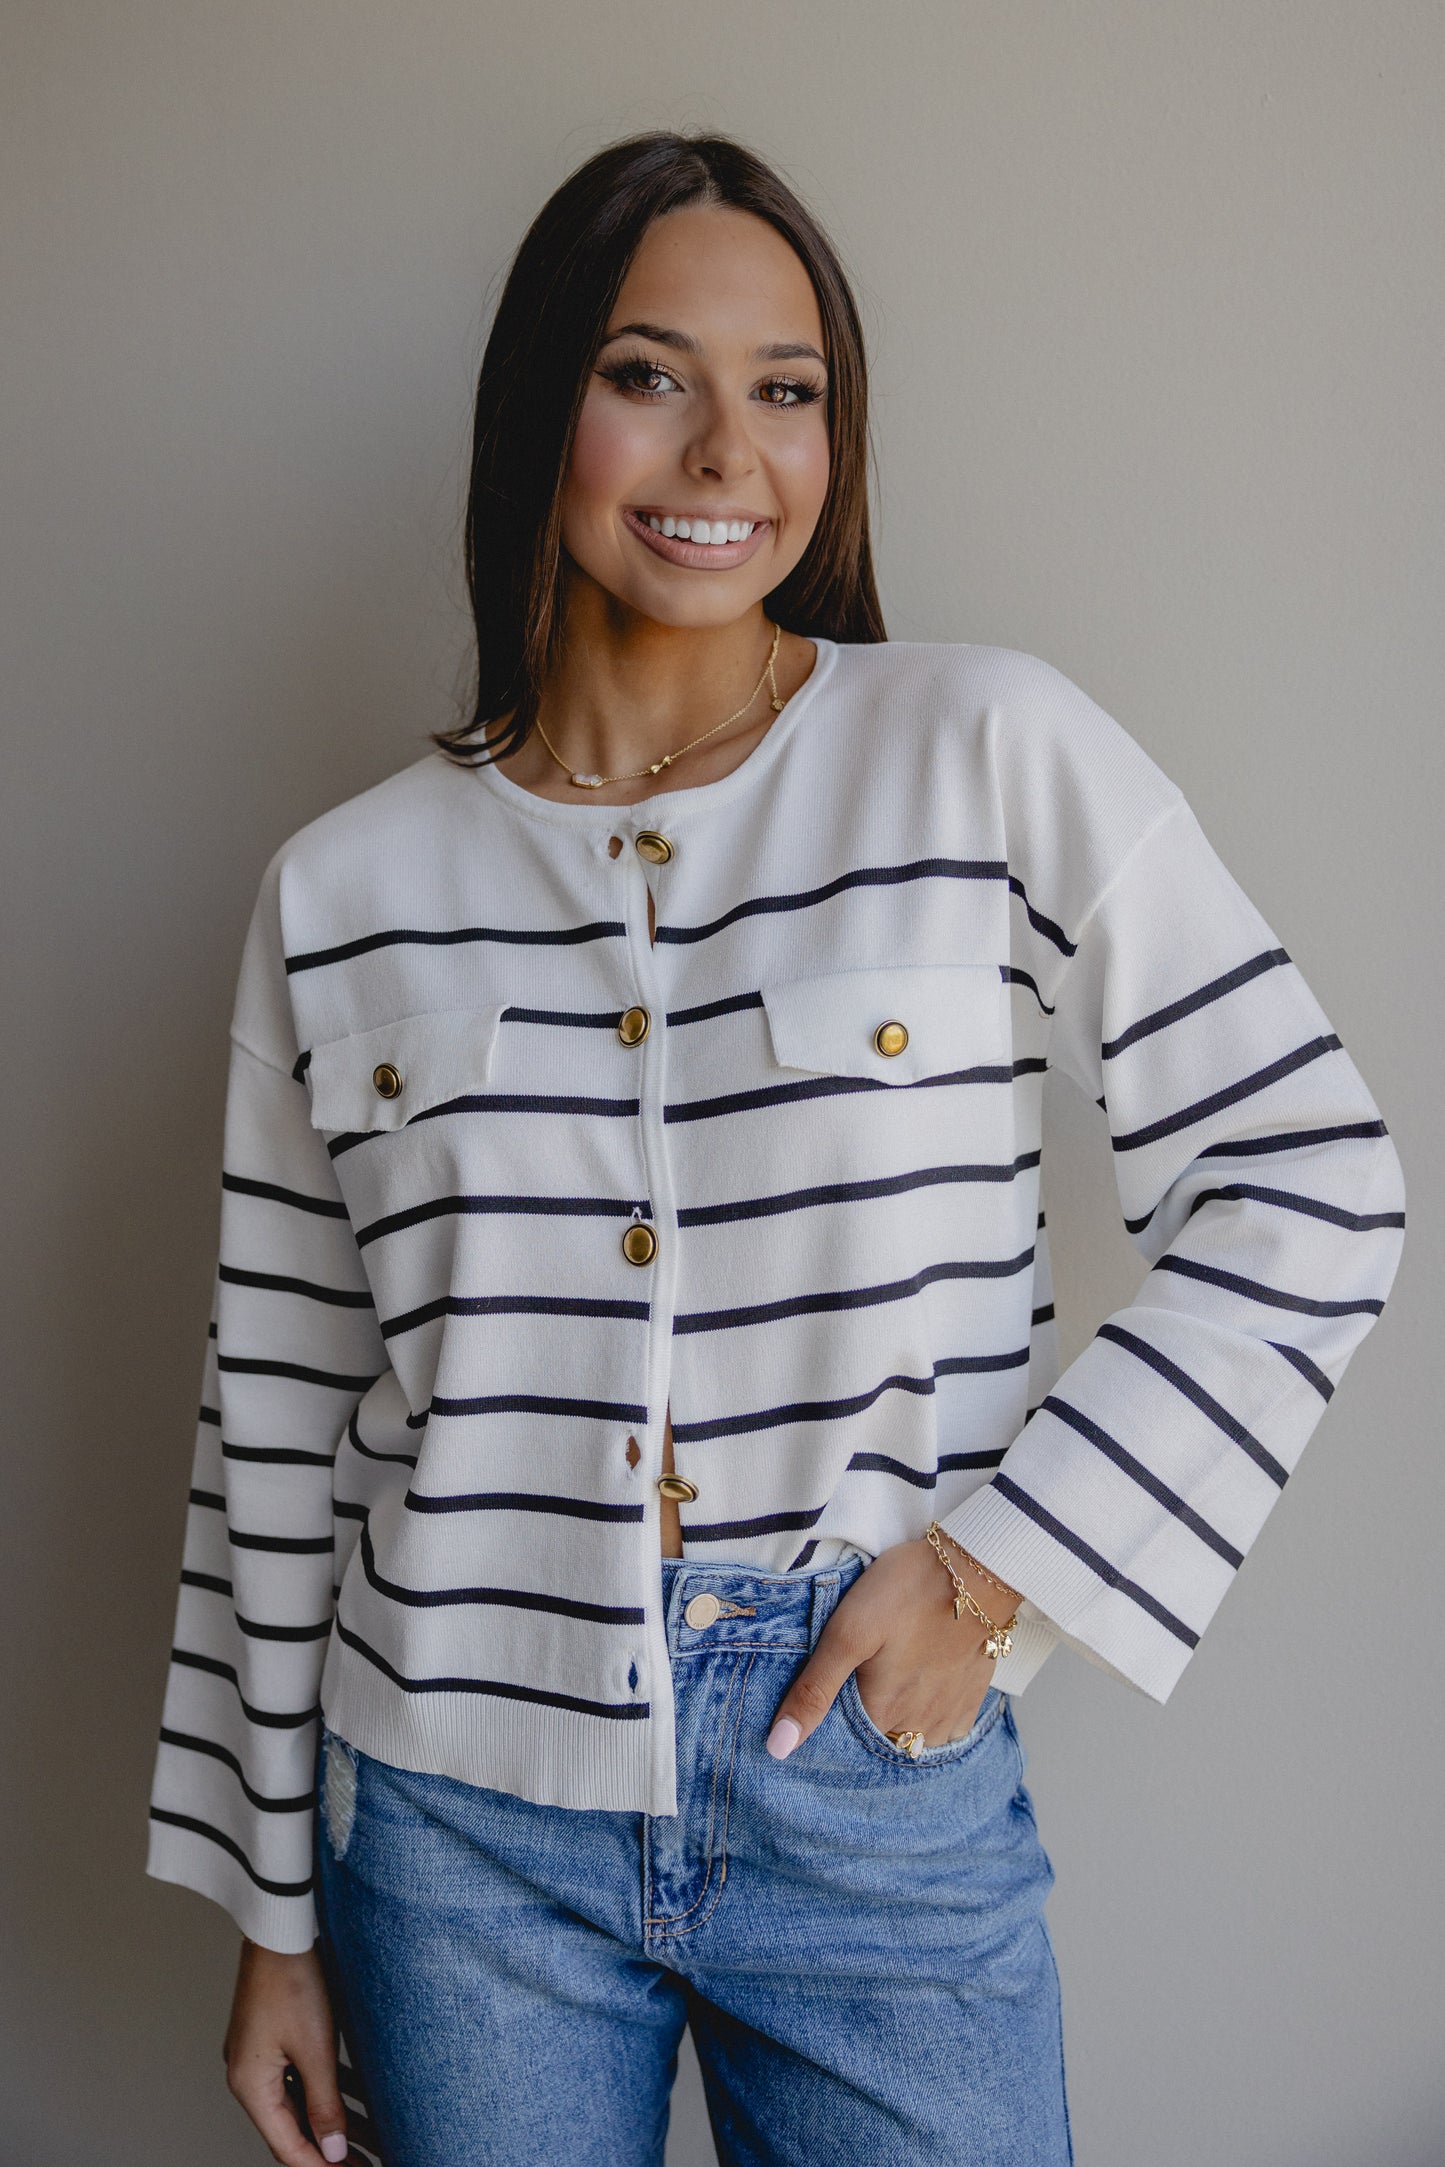 Can We Go Back Stripe Top White/Navy